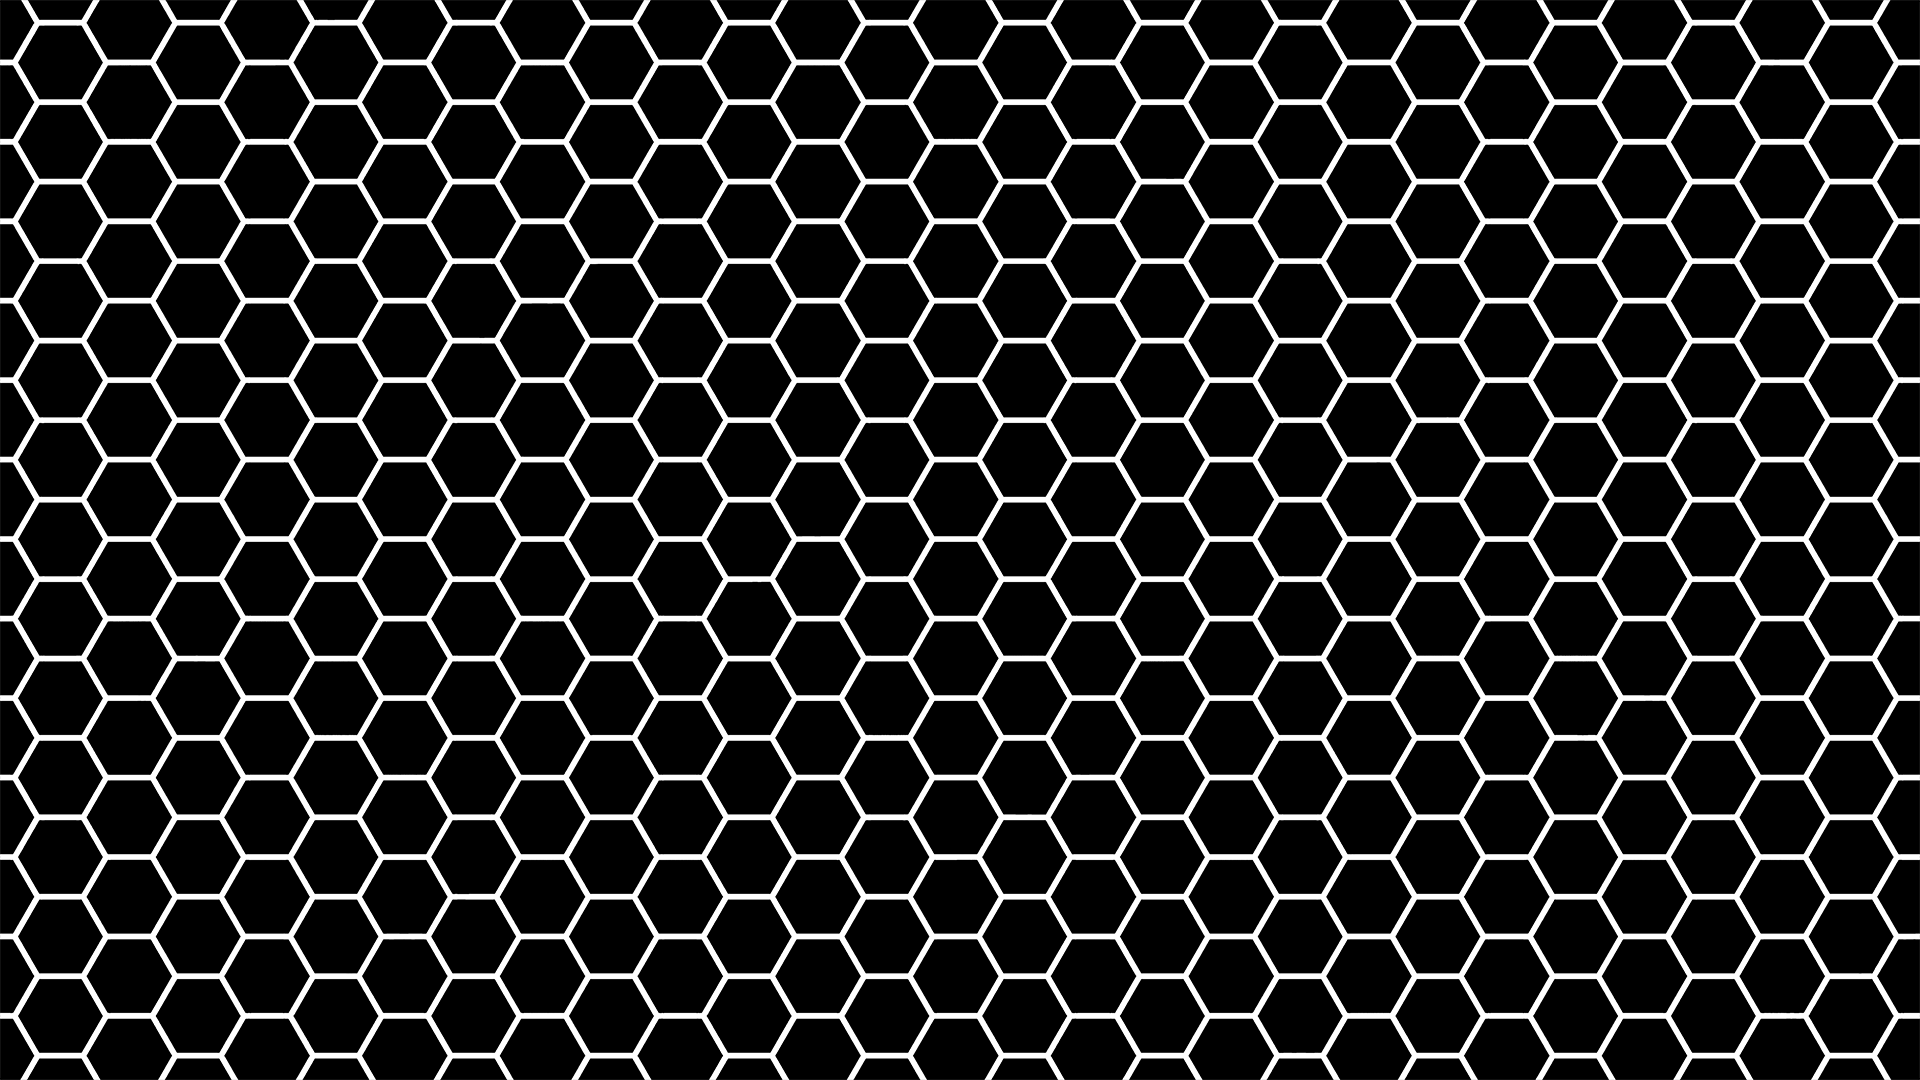 HONEYCOMB-PATTERN-Fine-White-on-Black.png